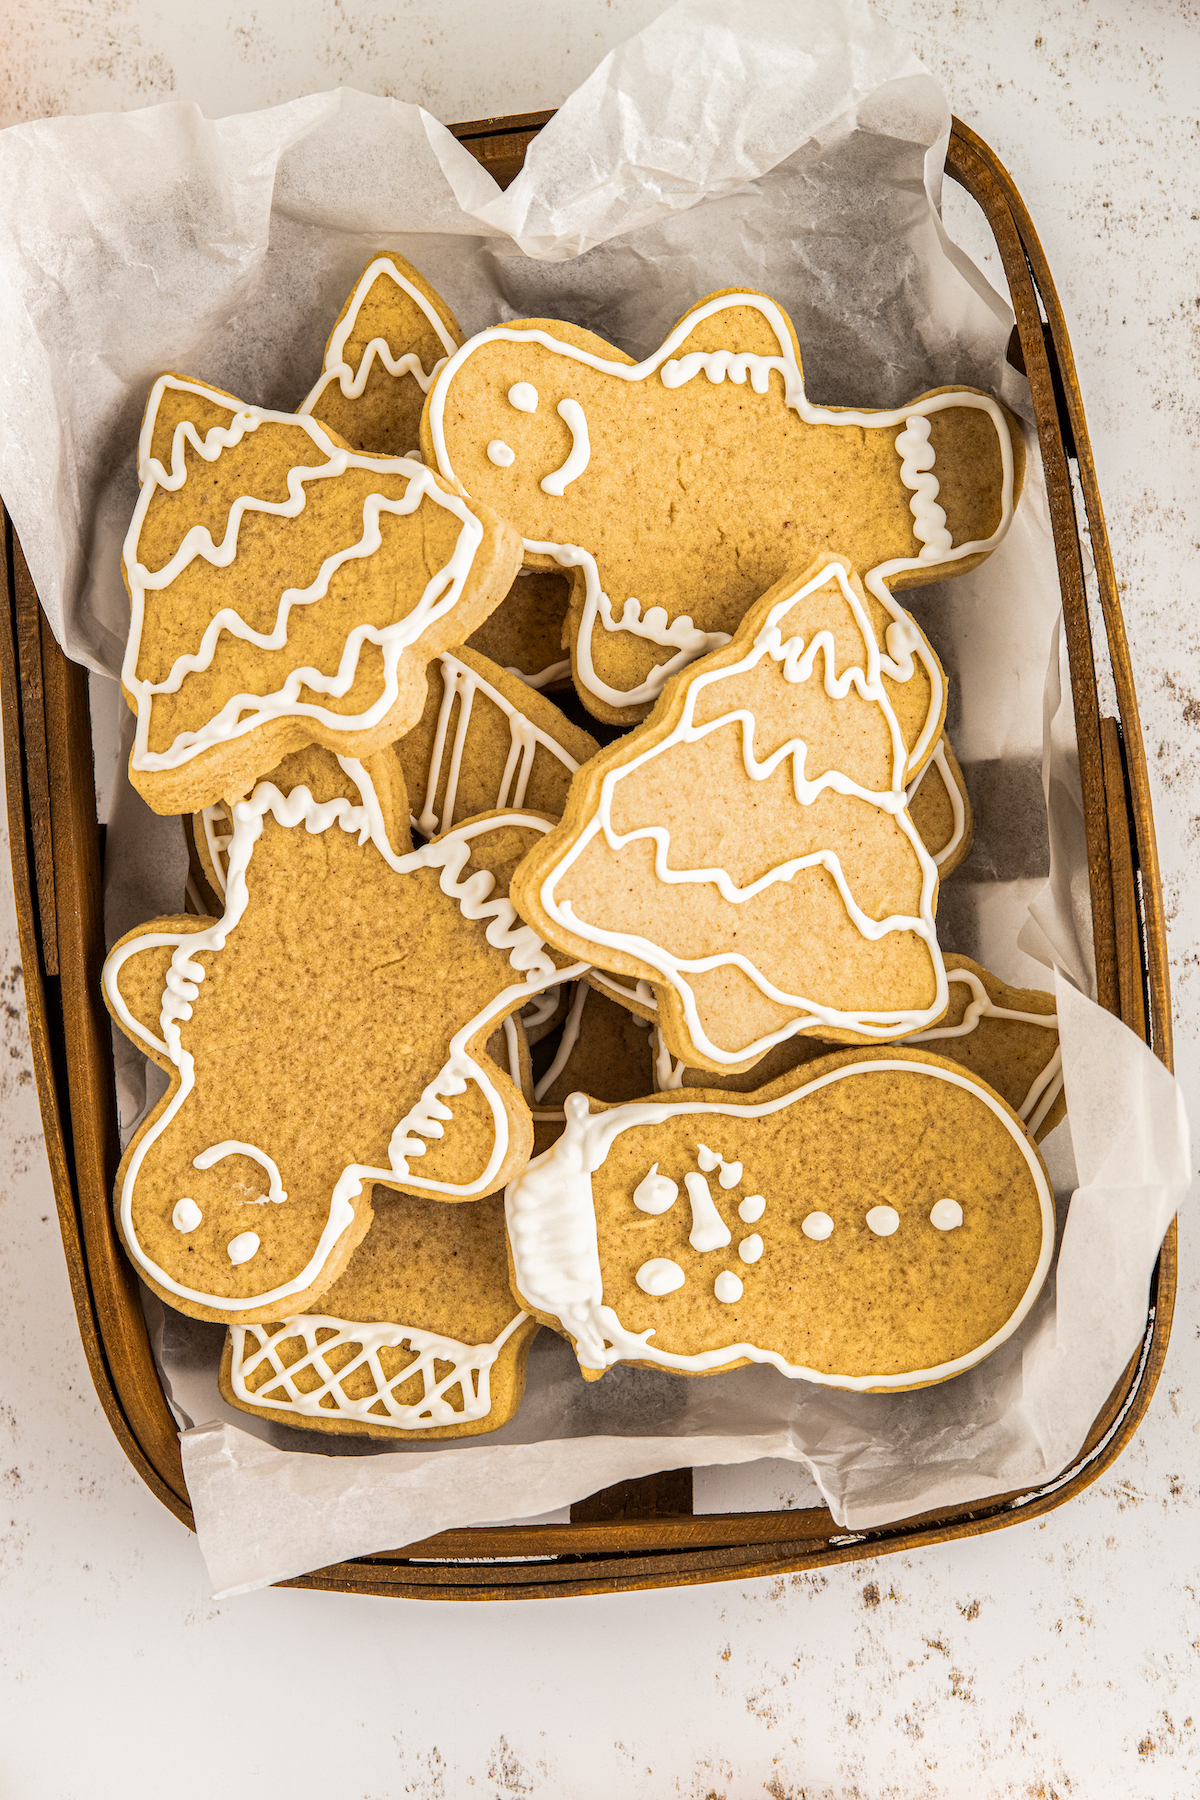 Christmas cut-out sugar cookies in a wax-paper lined basket.